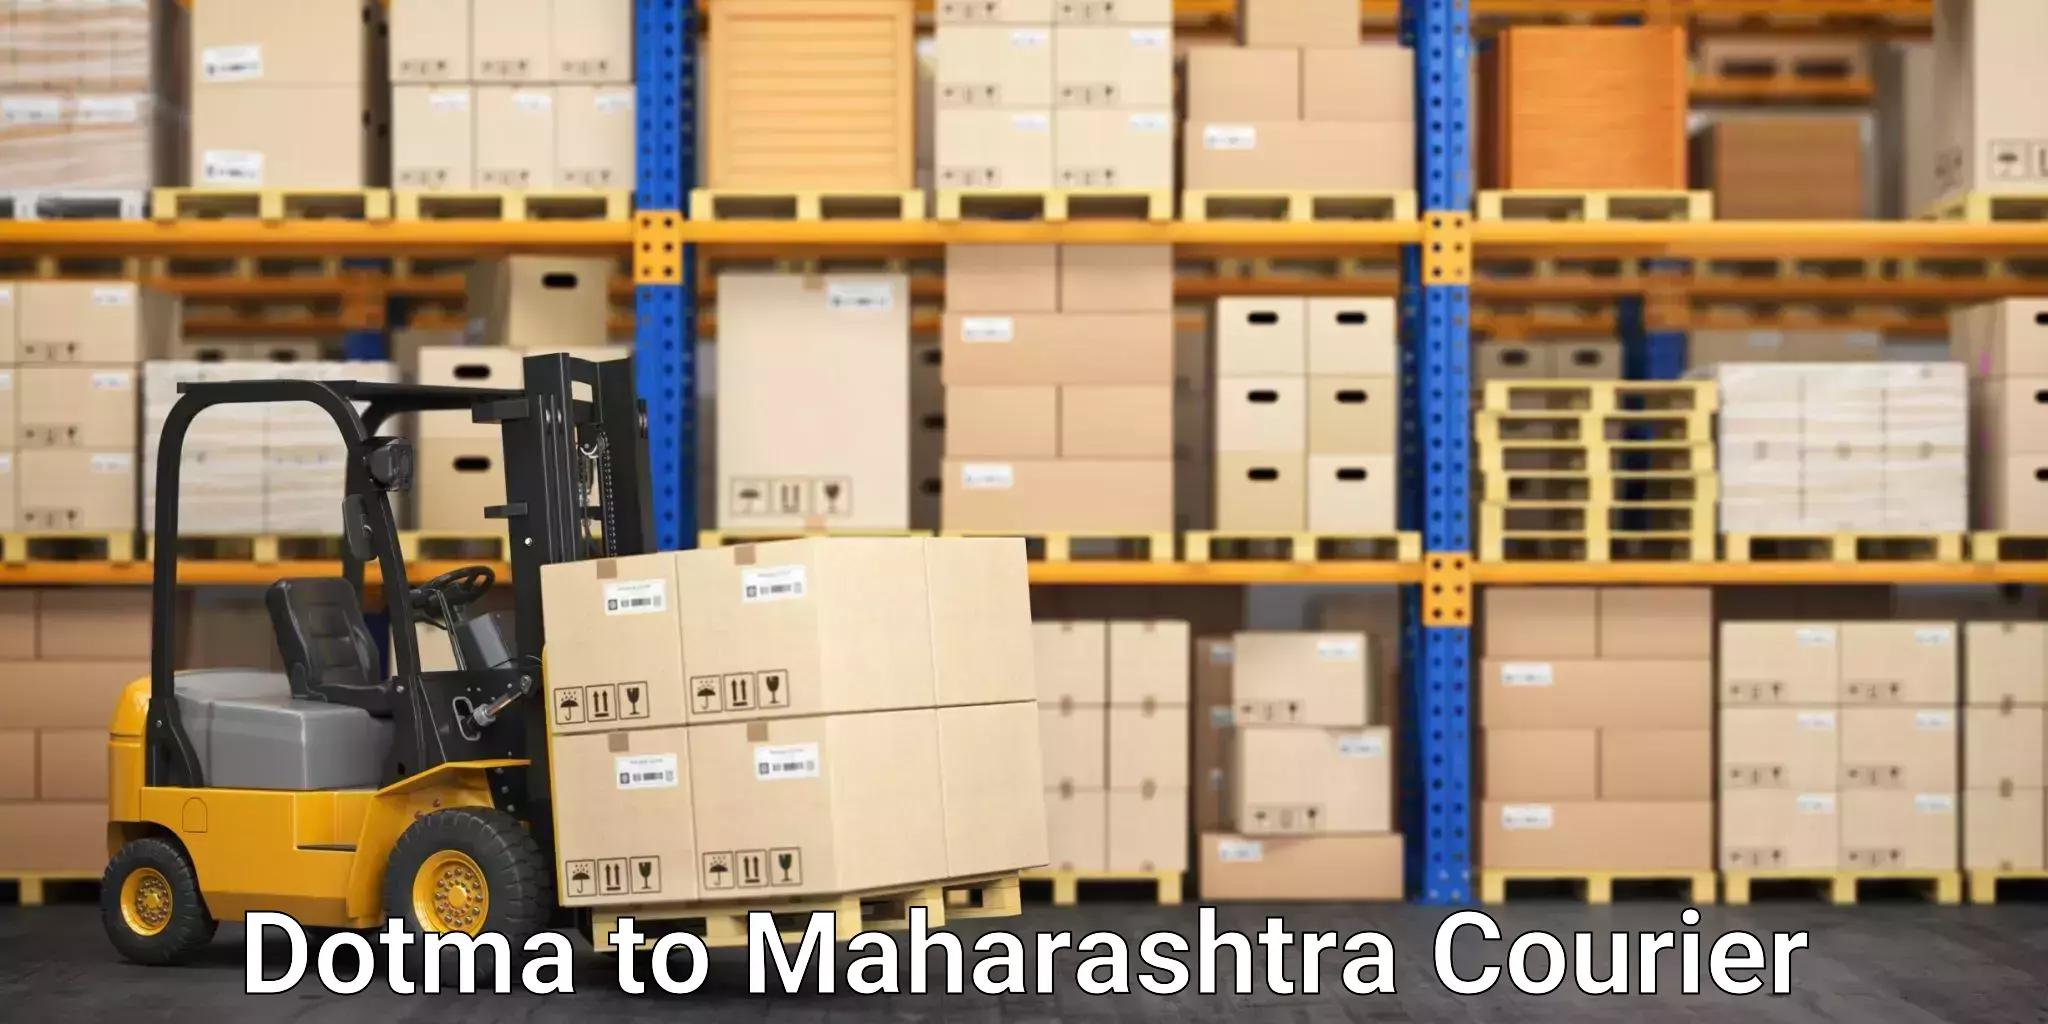 Fast-track shipping solutions Dotma to Osmanabad